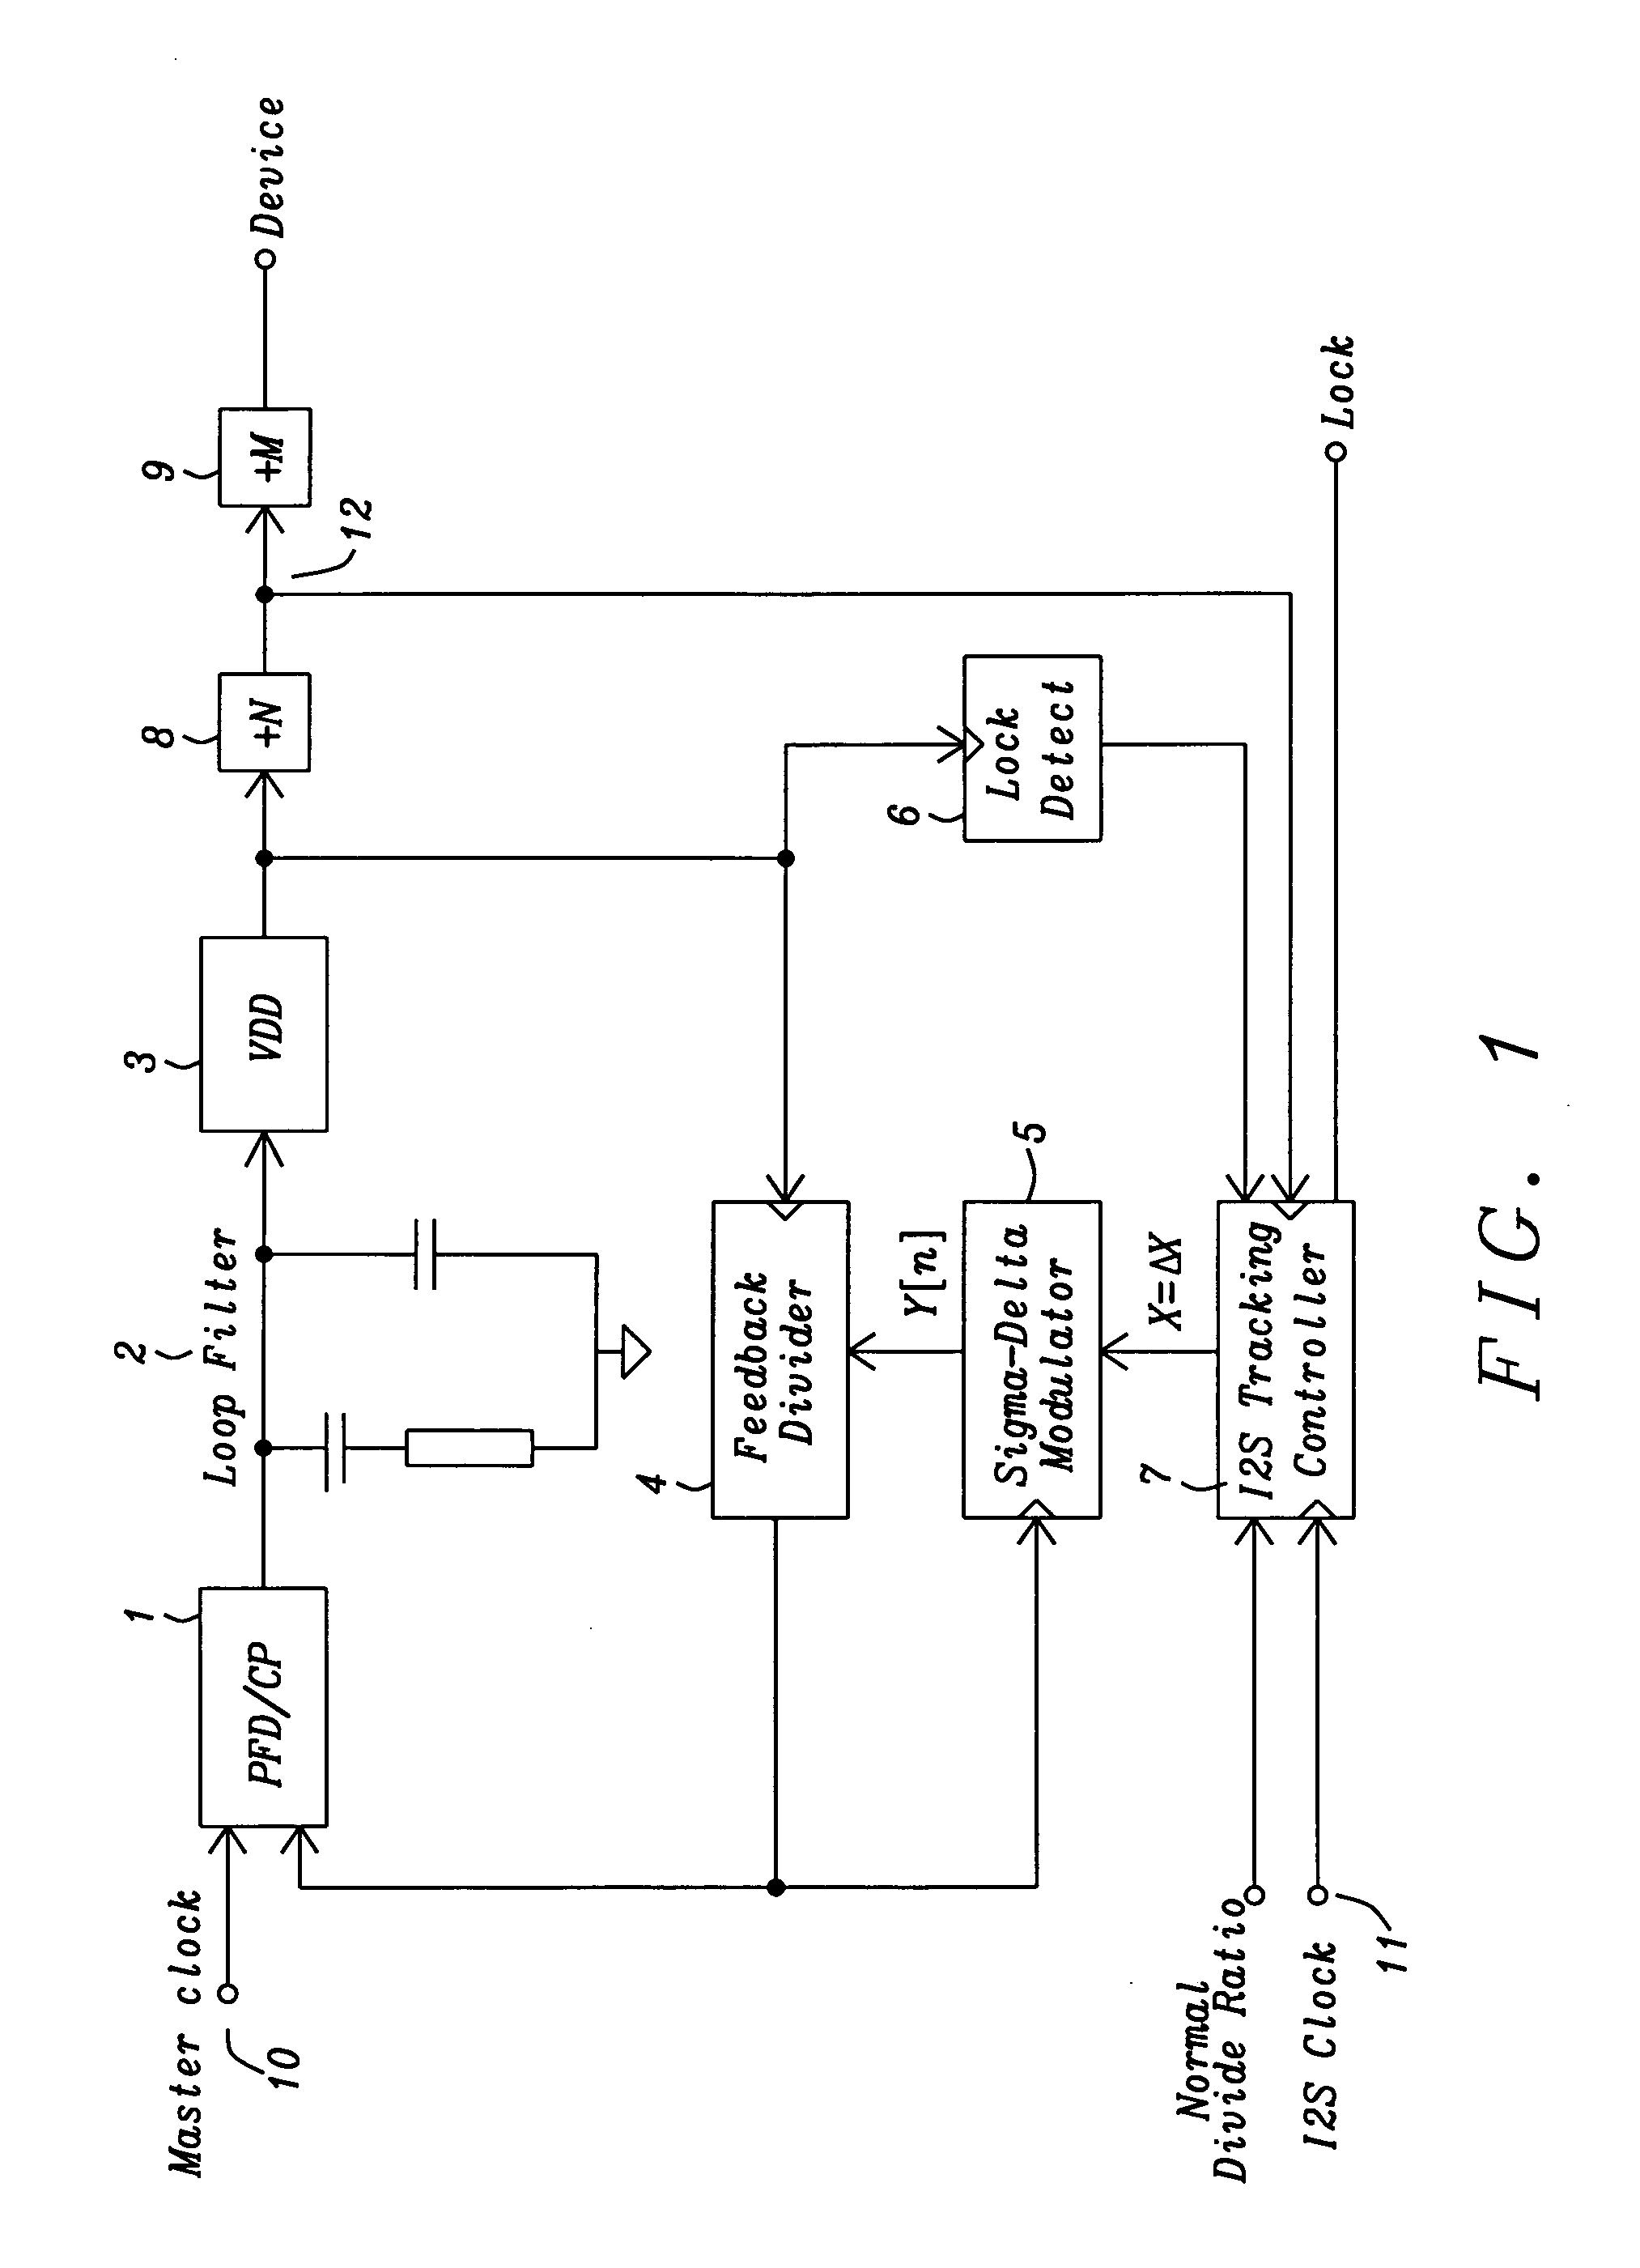 Digital controller for automatic rate detection and tracking of audio interface clocks